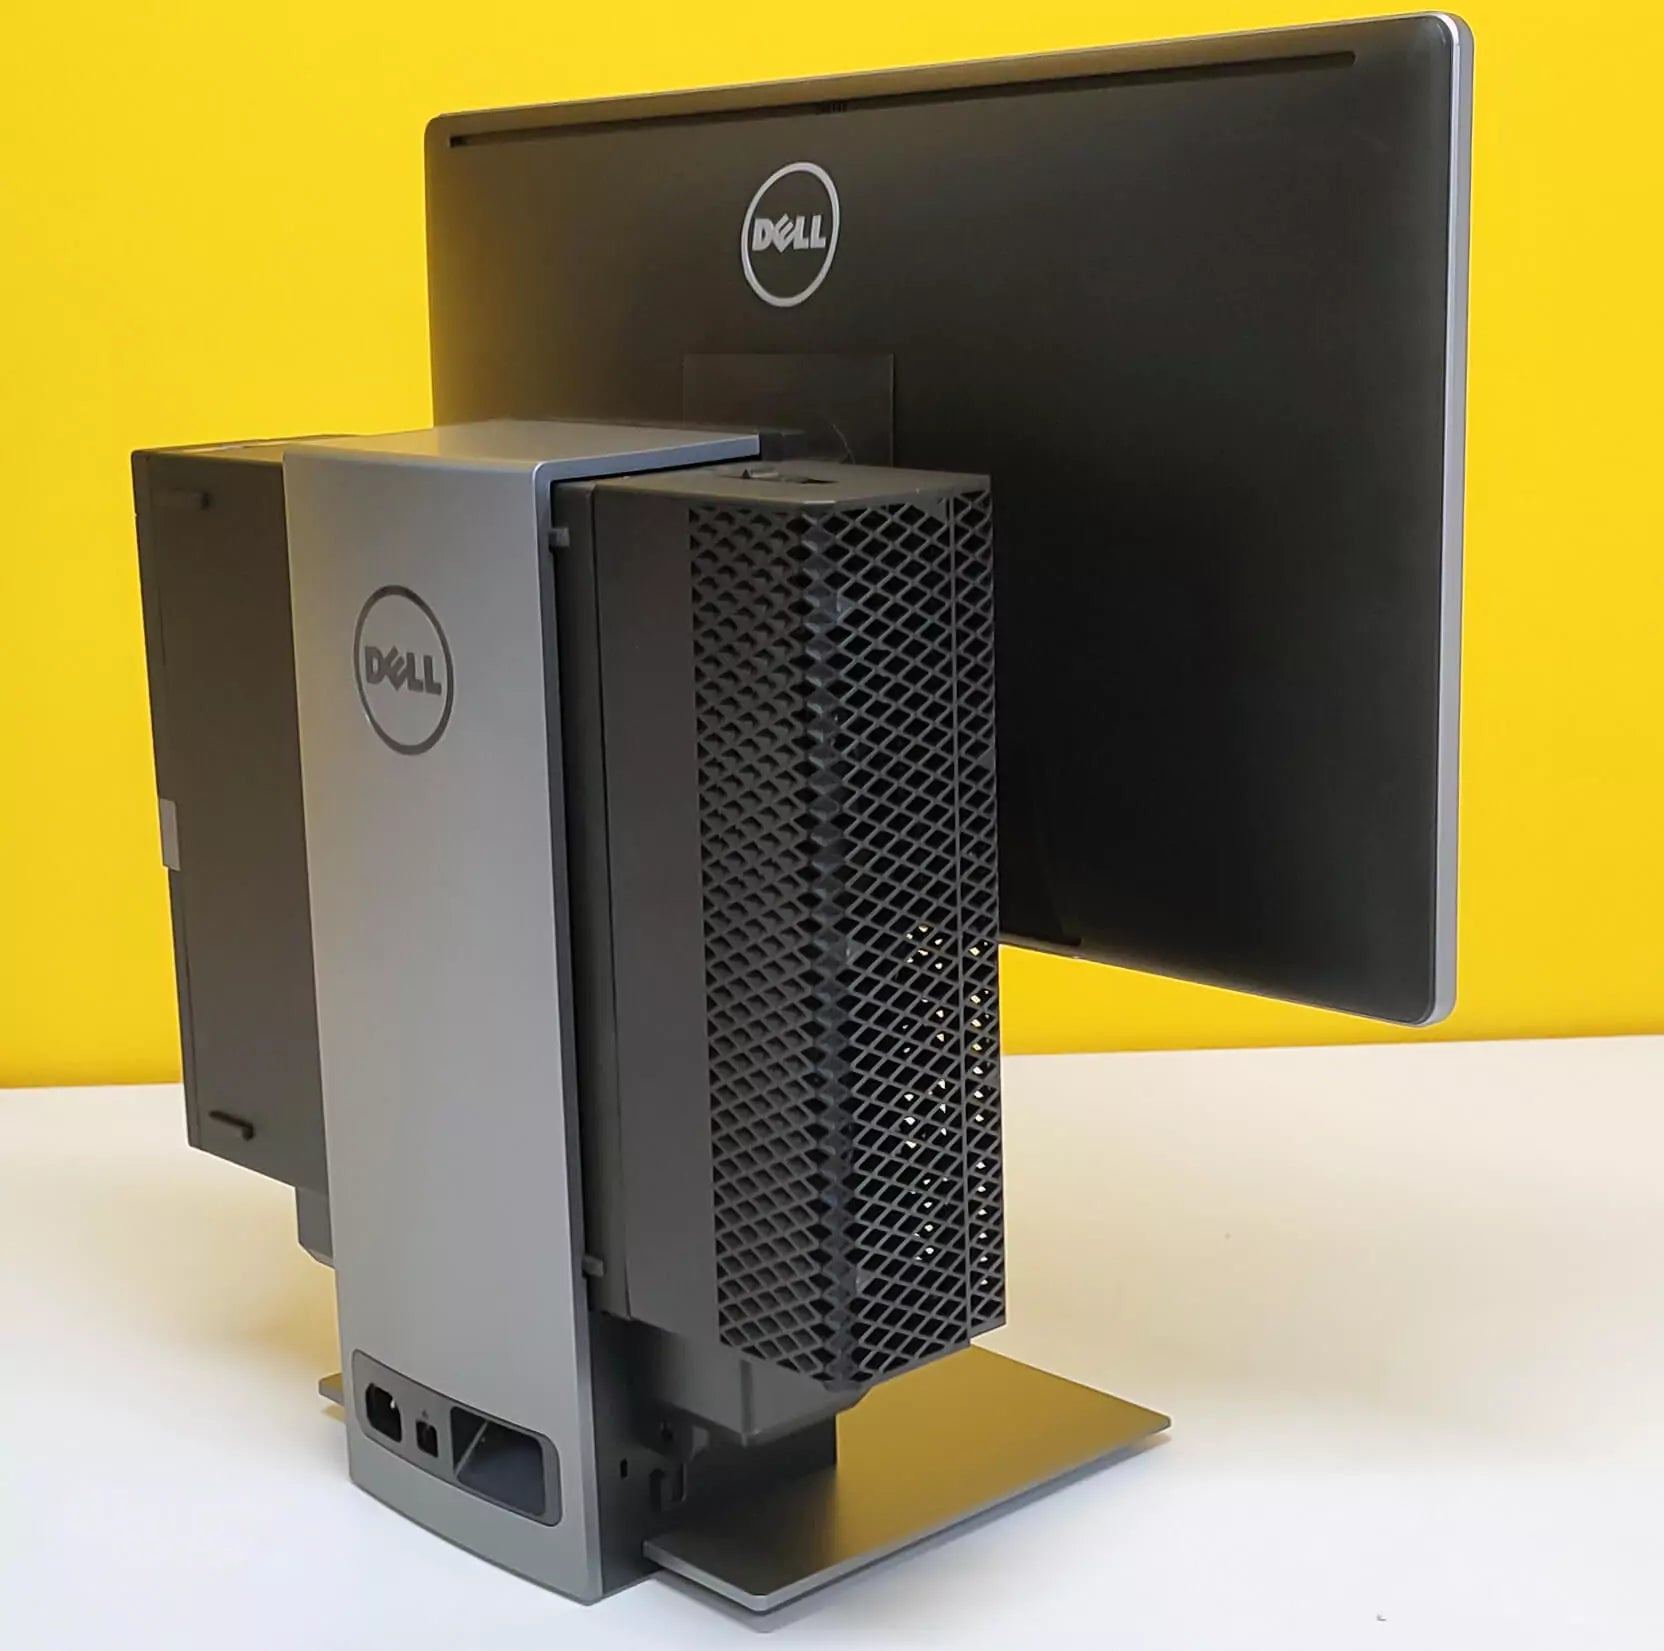 All In One DELL OptiPlex 3050 Desktop SFF PC | Intel Core i7-6700 3.4Ghz | Ram 32GB | SSD 512GB | Windows 11 Pro + Dell P2314H FullHD Monitor with OSS17 Stand